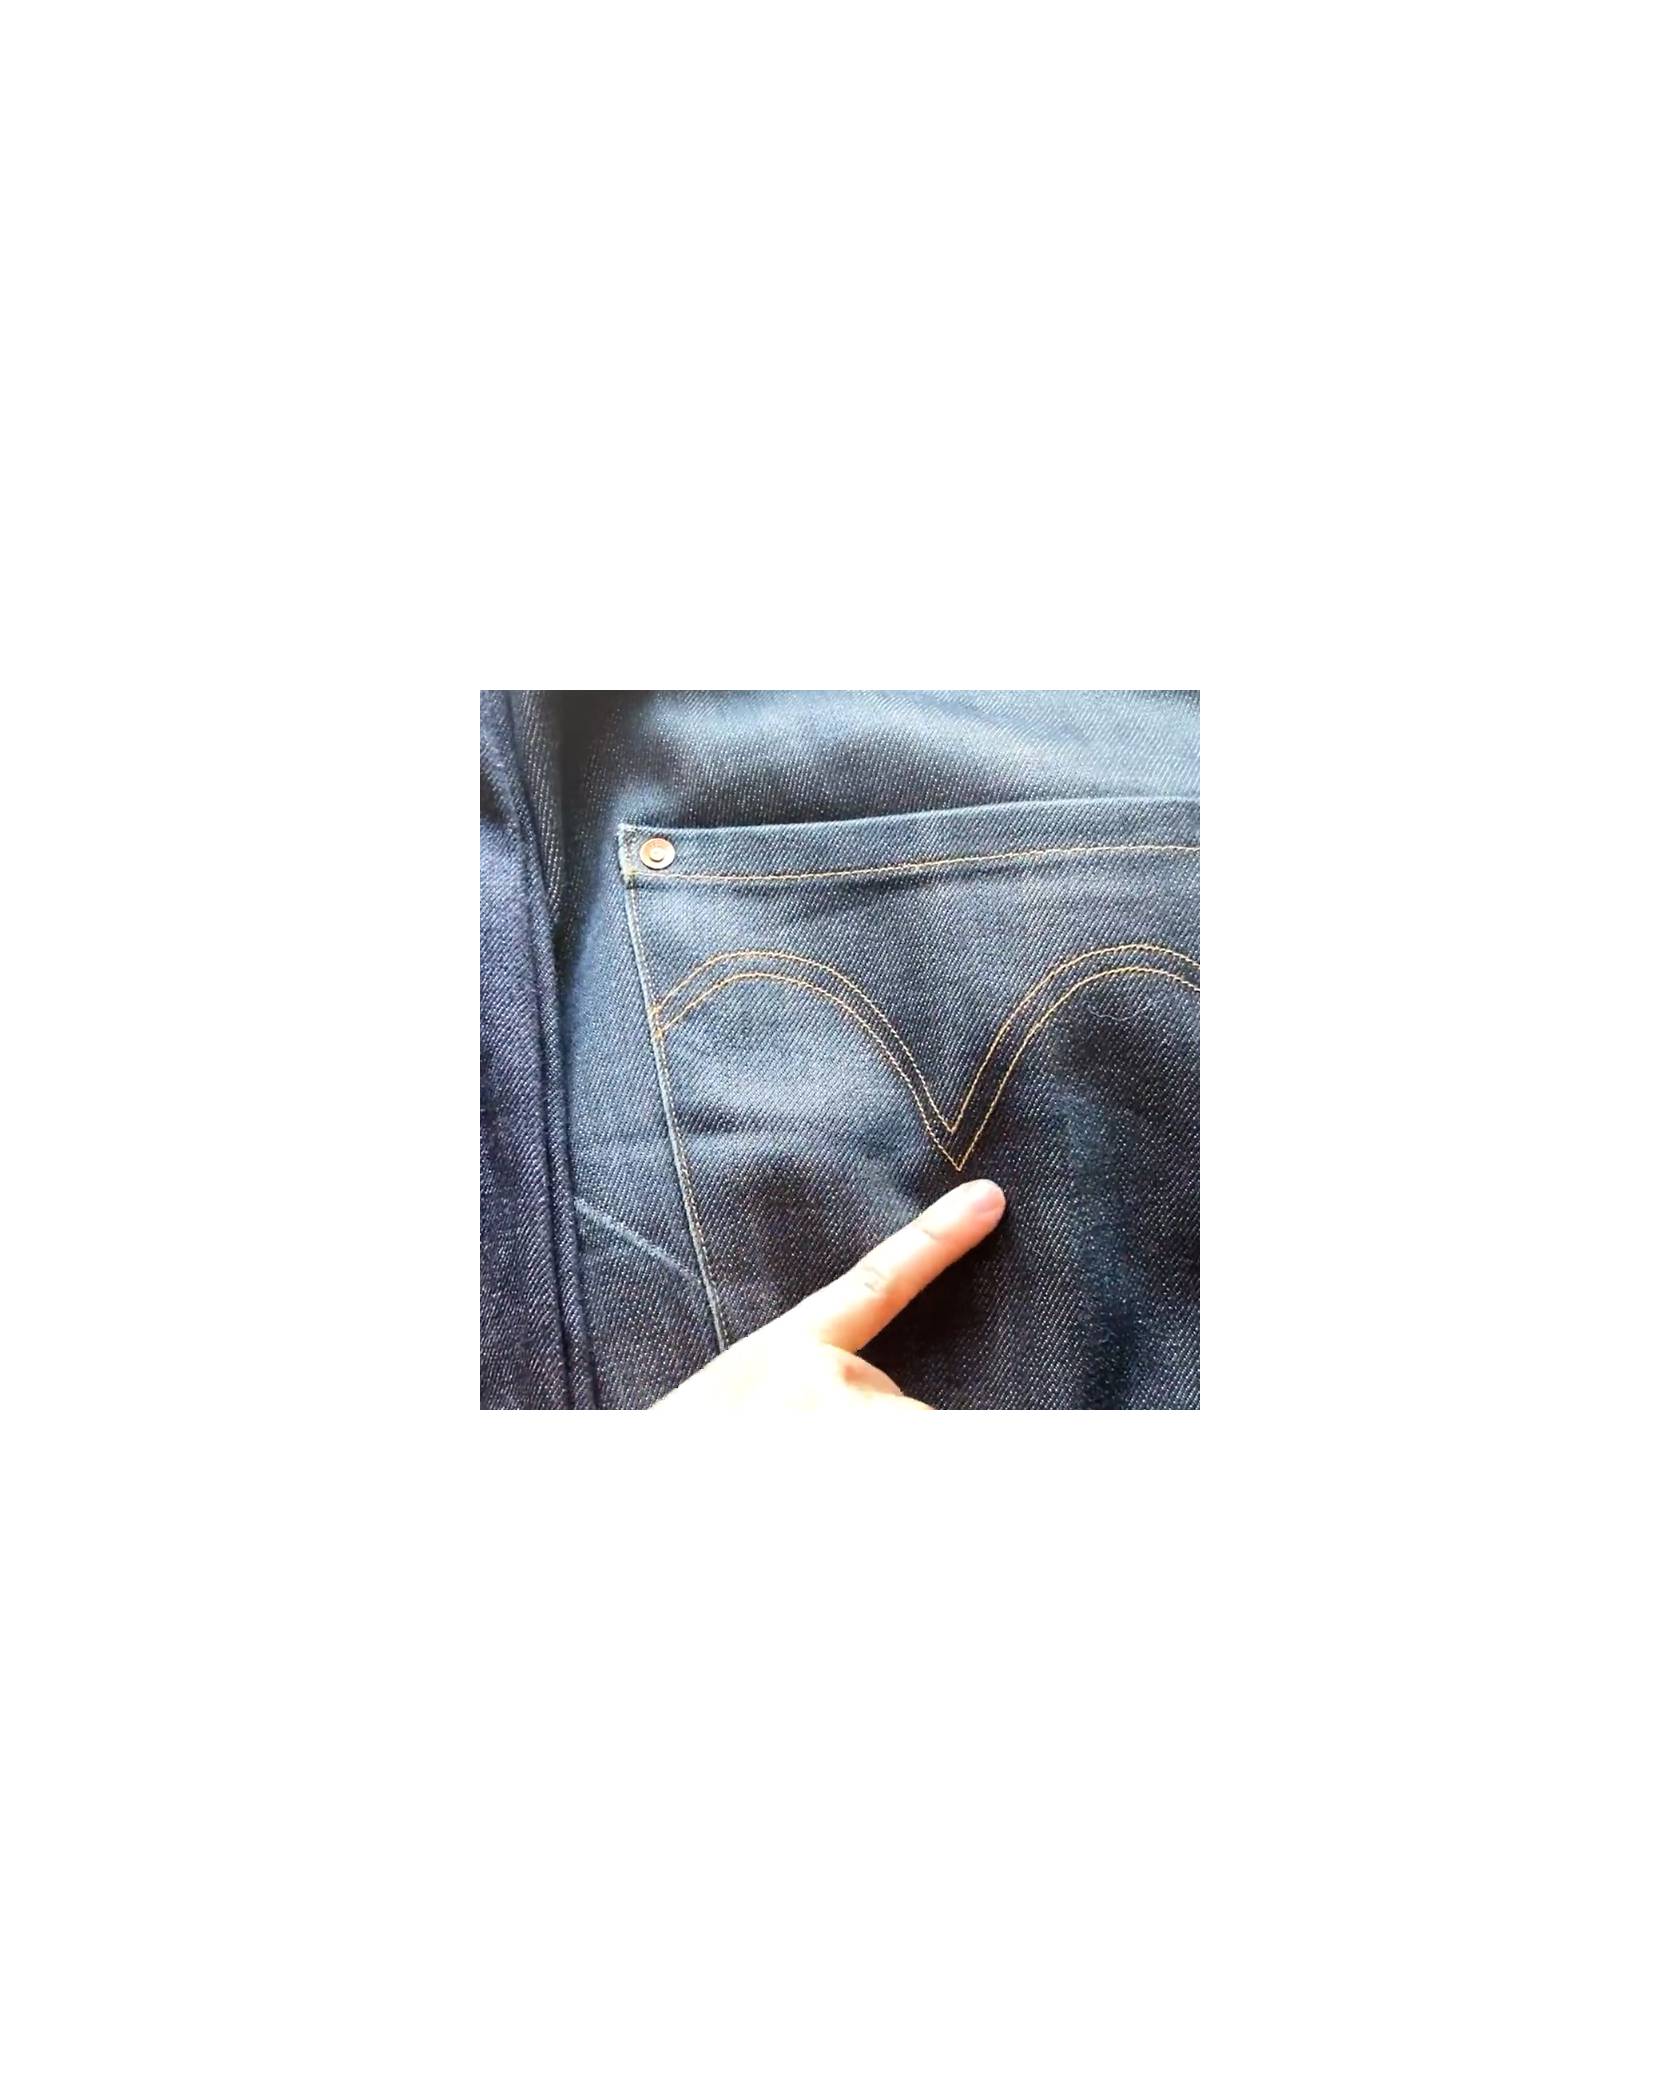 Complete Guide to Denim Terminology - Anatomy of Jeans | Off The Cuff